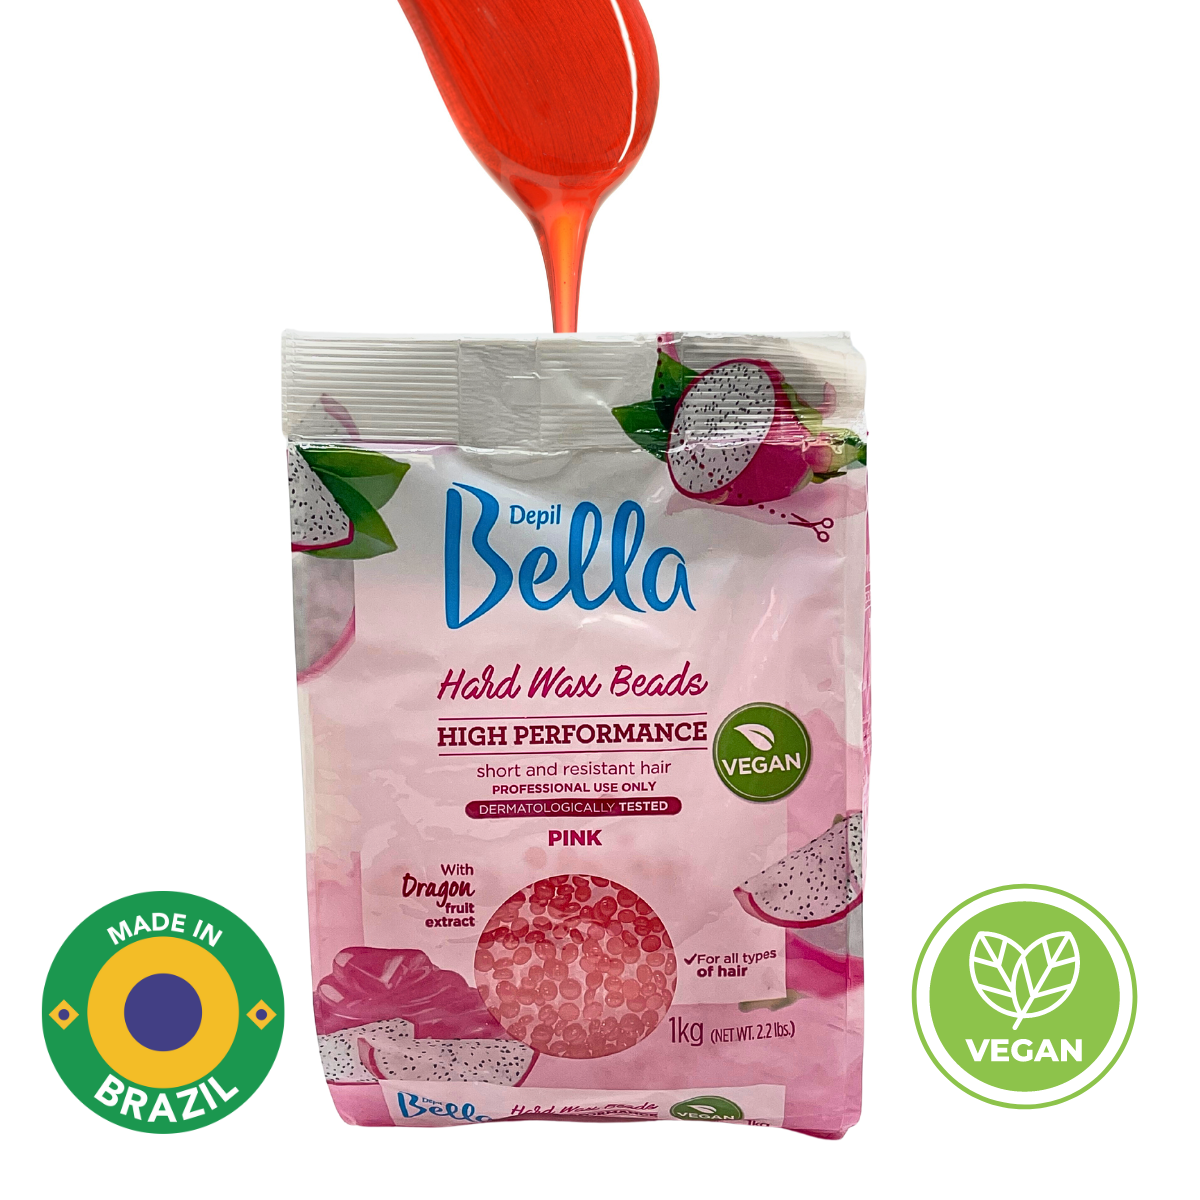 Depil Bella Pink Pitaya Confetti Hard Wax Beads- High-Performance Hair Removal, Vegan 2.2 lbs (10 Units Offer) - Buy professional cosmetics dedicated to hair removal